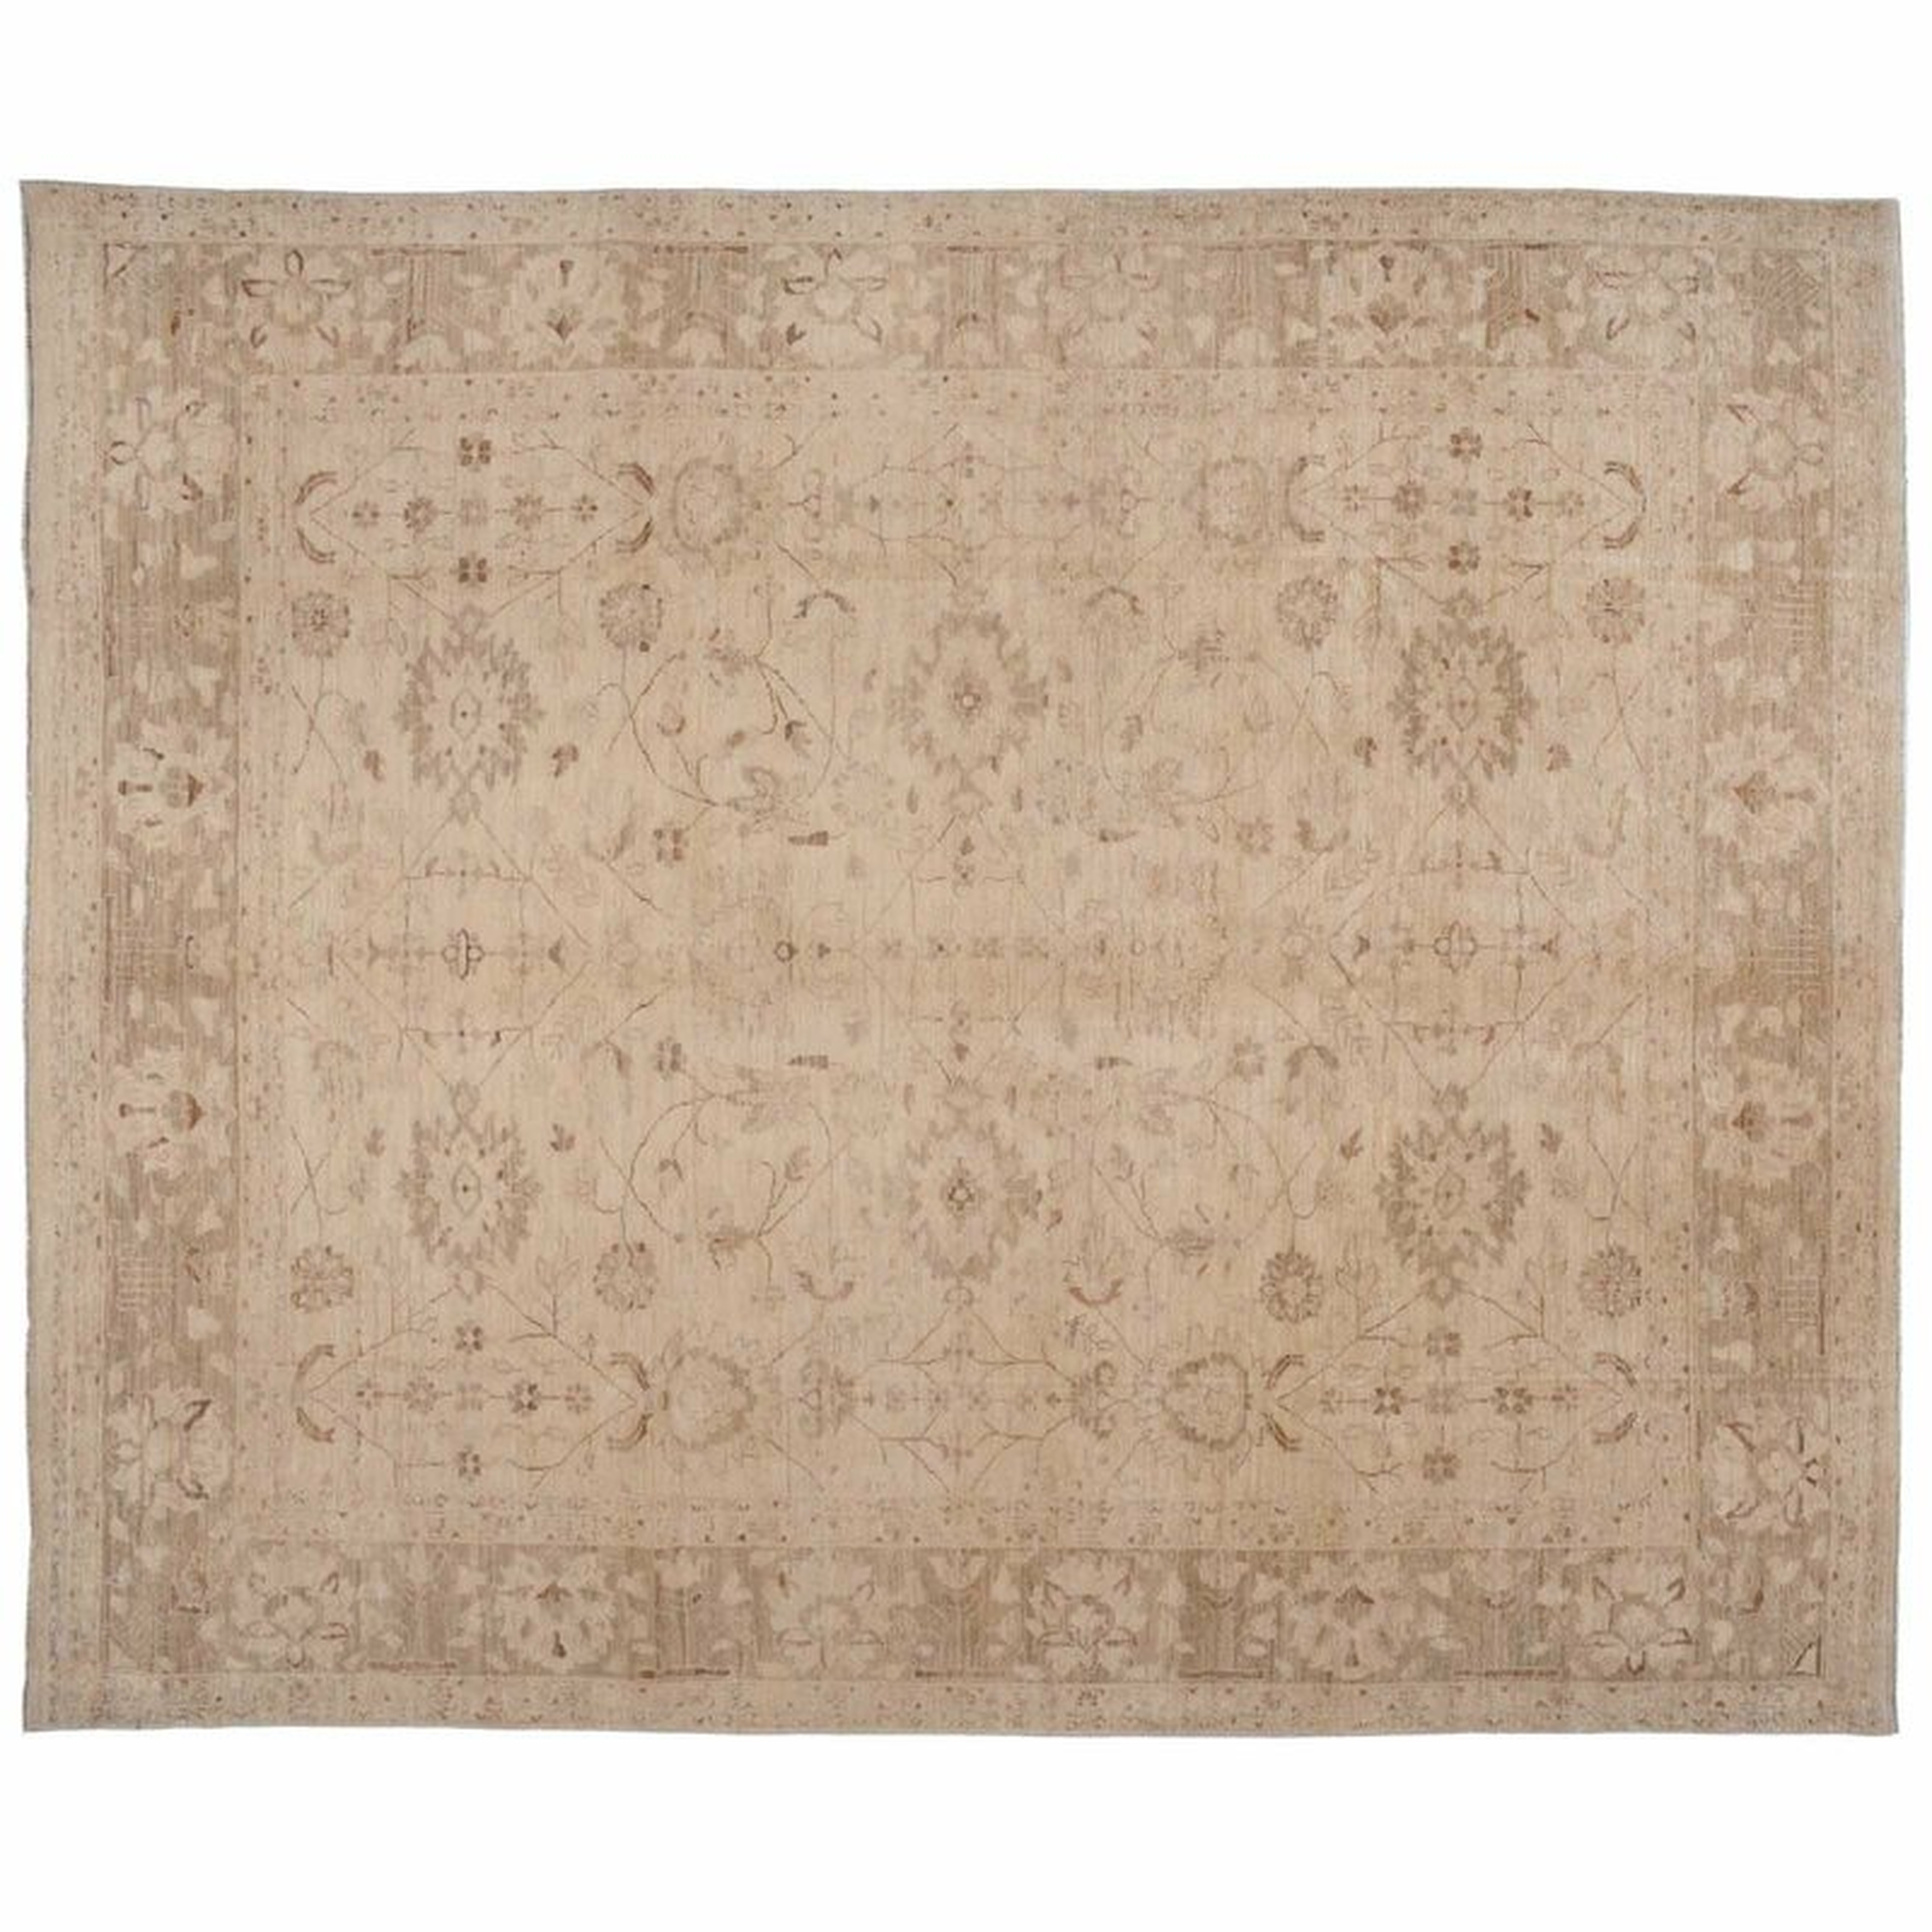 Aga John Oriental Rugs One-of-a-Kind Hand-Knotted Beige/Light Green 8' x 9'9"" Wool Area Rug - Perigold